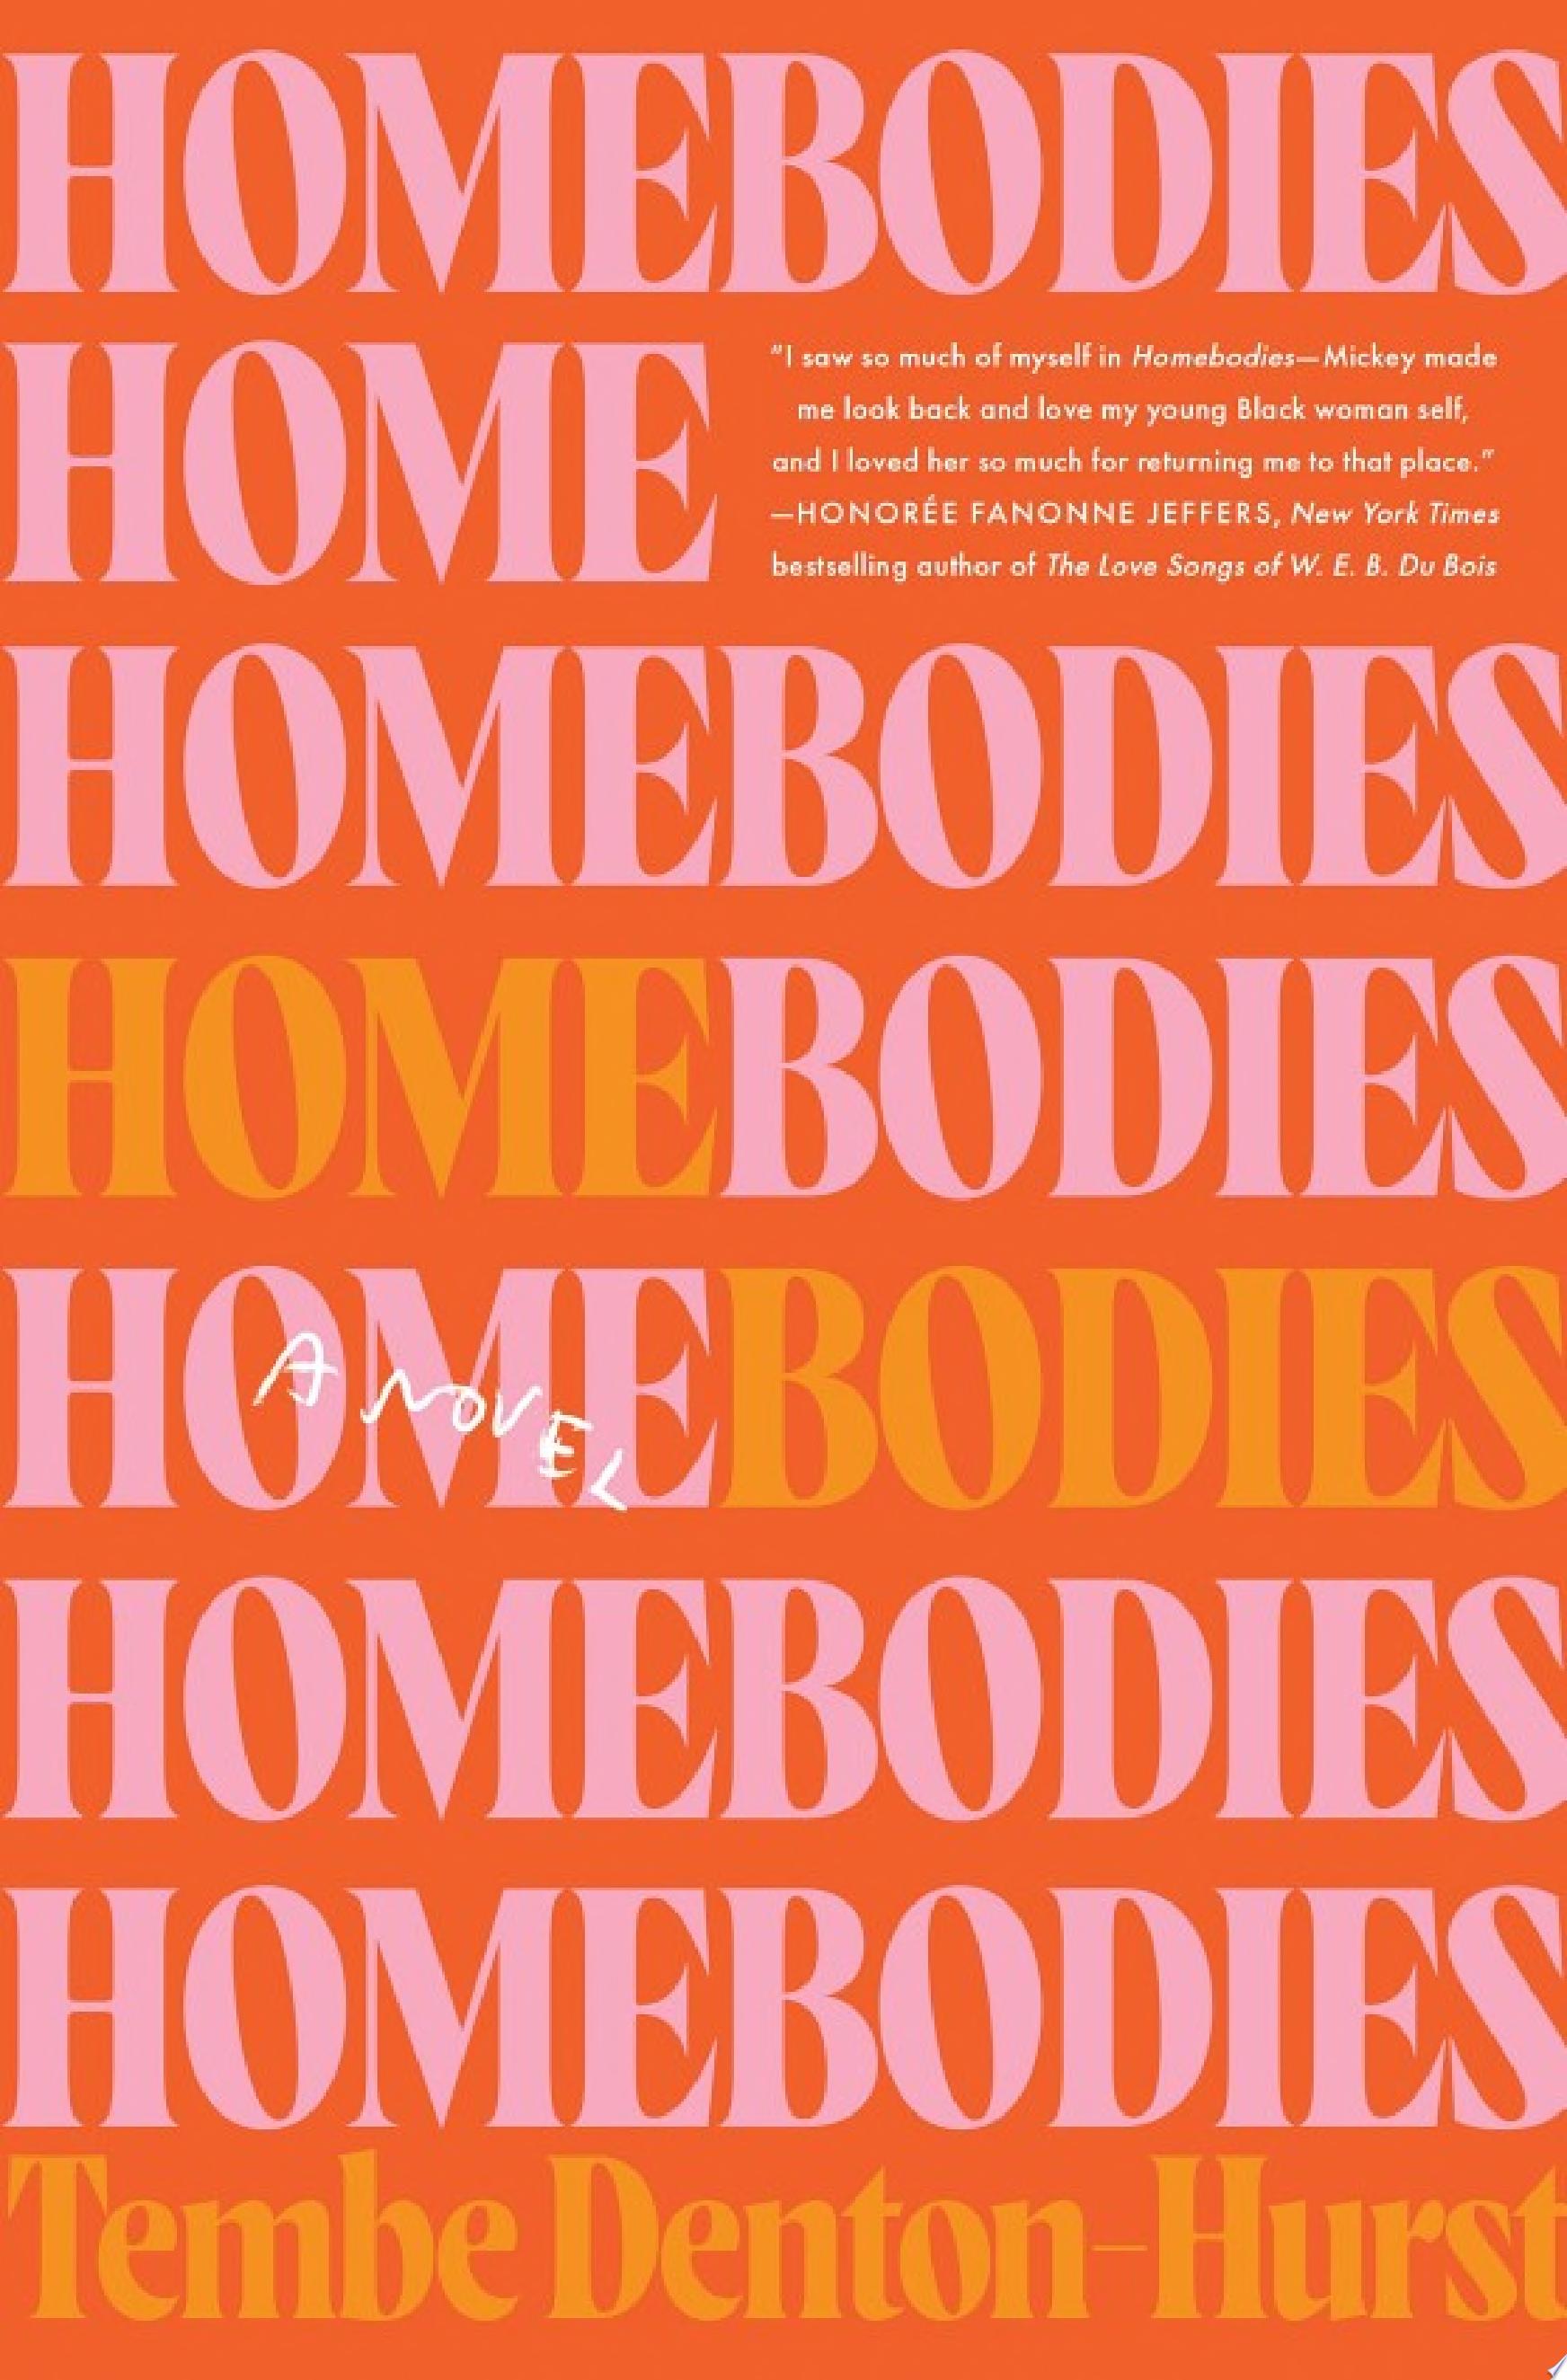 Image for "Homebodies"